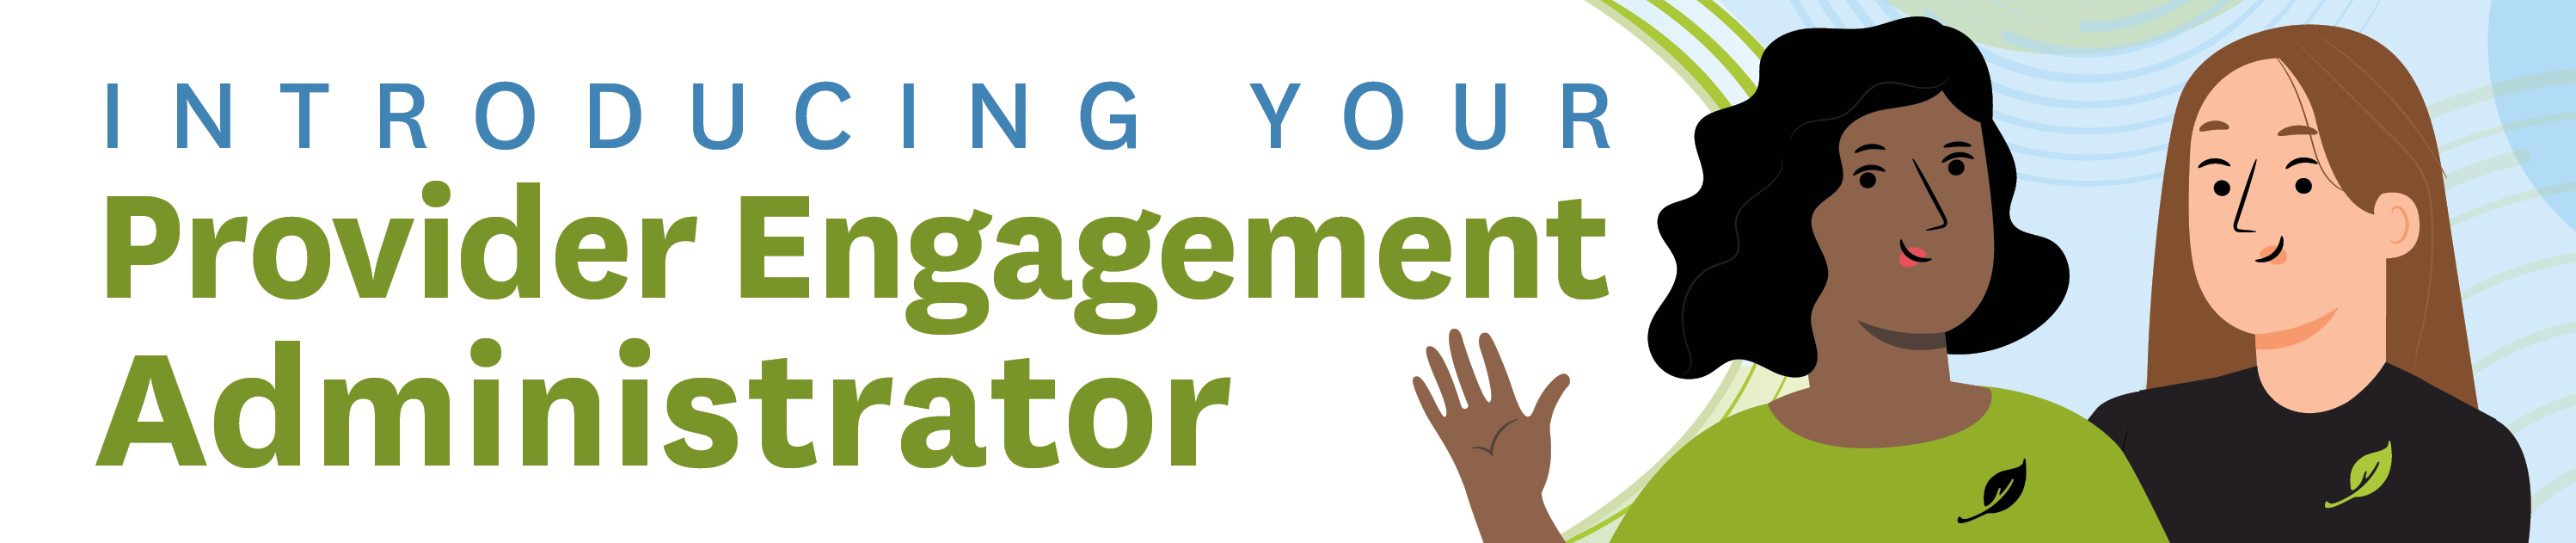 Introducing Your Provider Engagement Administrators